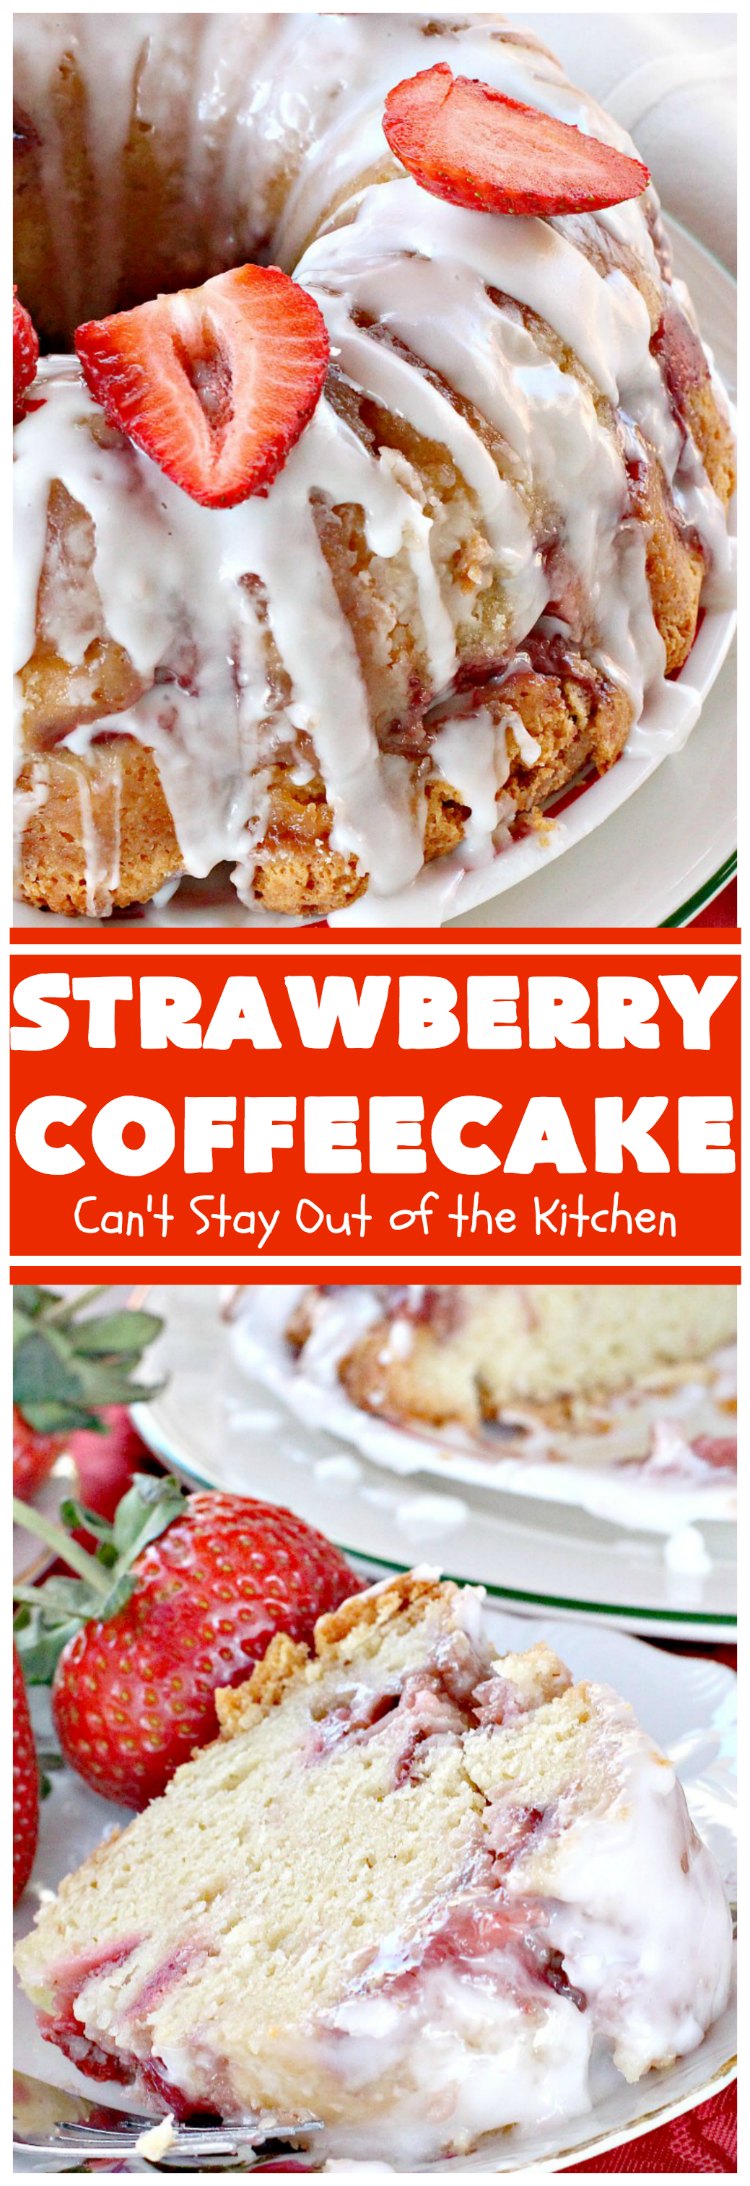 Strawberry Coffeecake | Can't Stay Out of the Kitchen